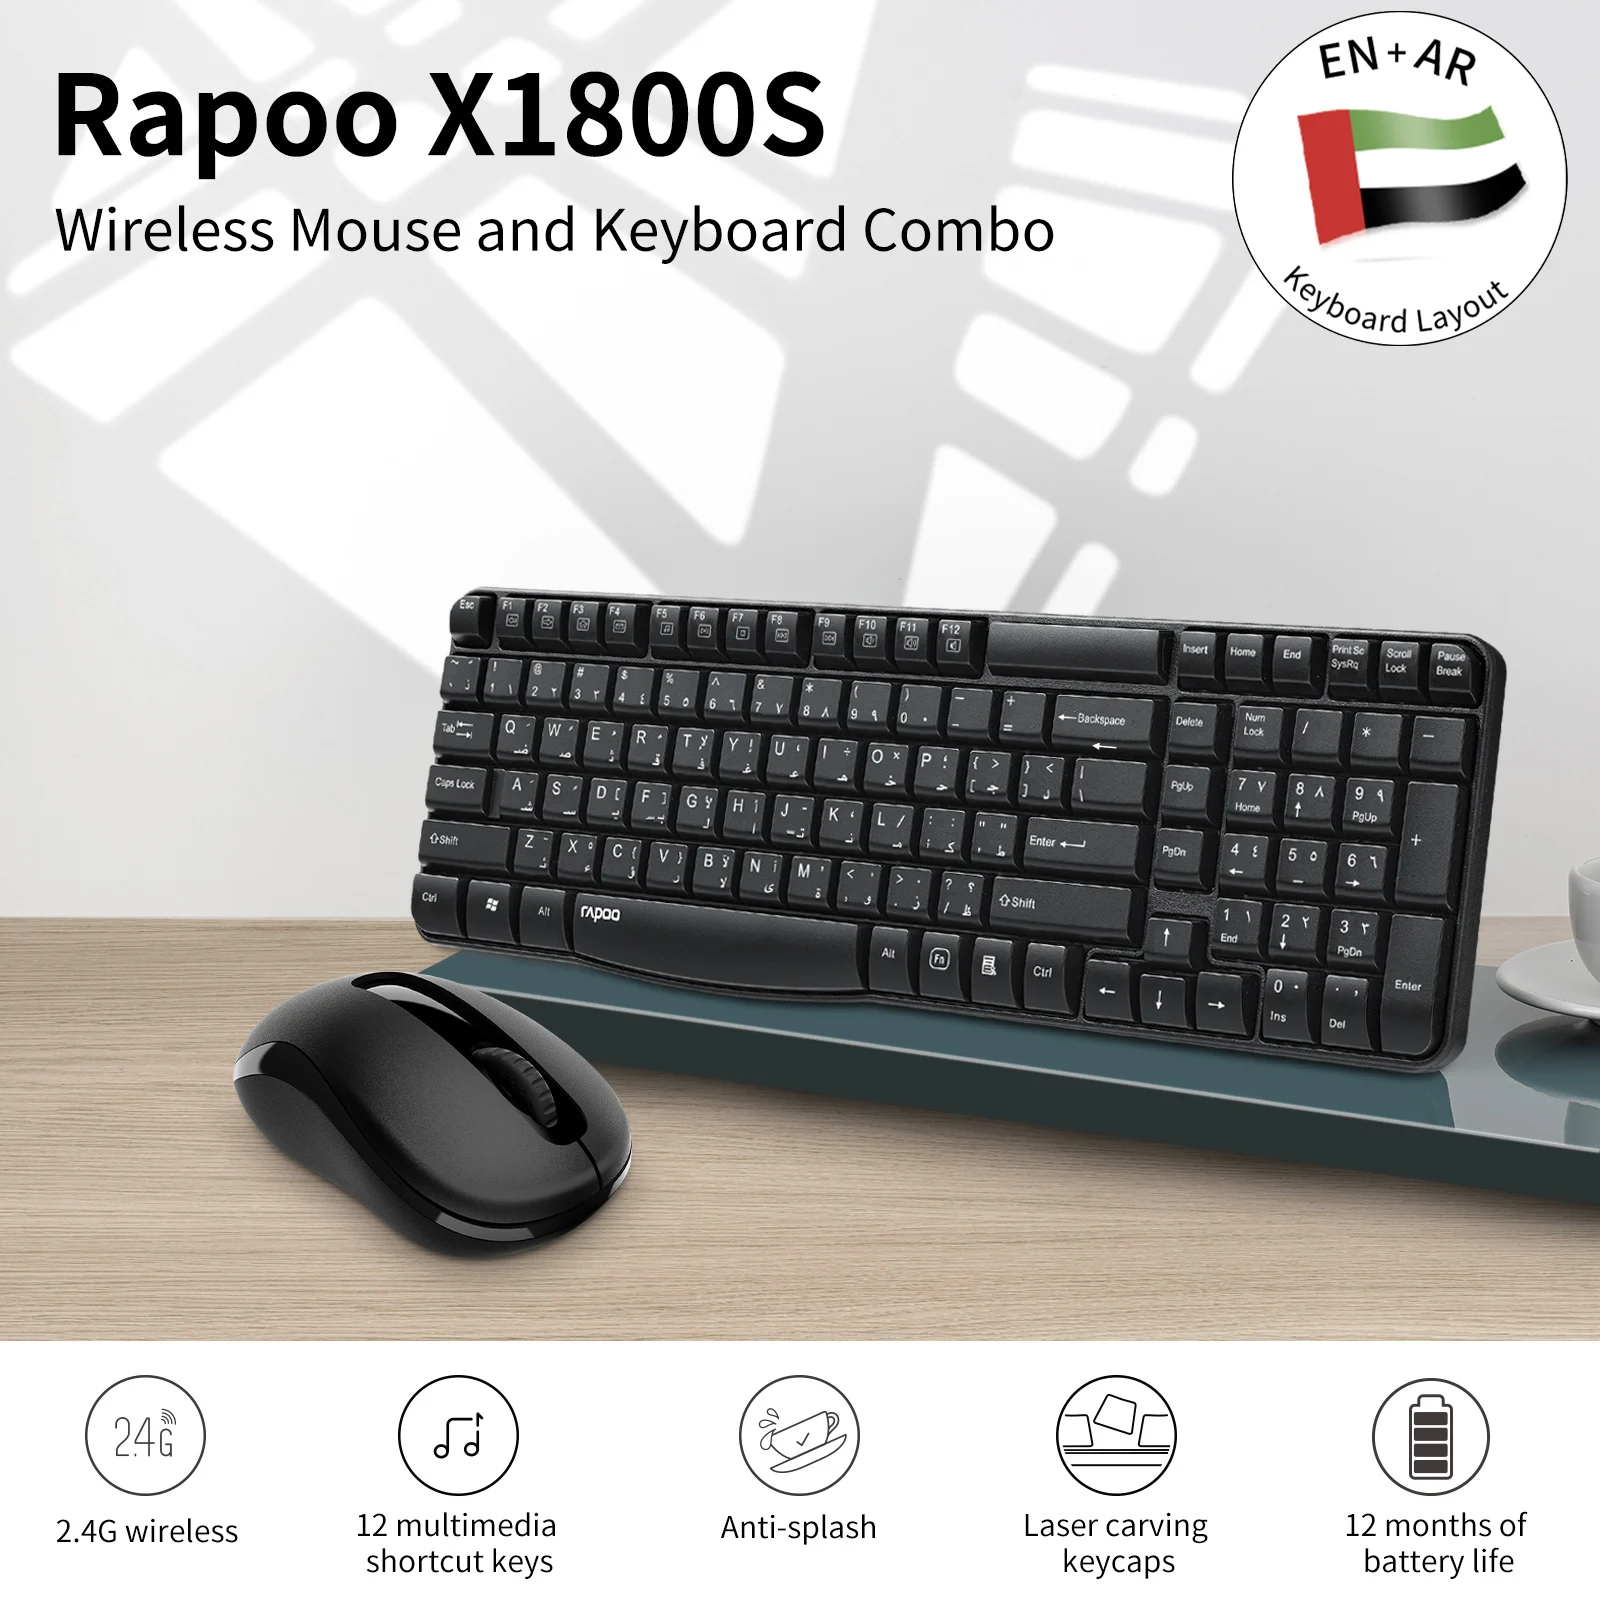 

Rapoo X1800S Wireless Optical Mouse and Keyboard Combo For PC Laptop Desktop Tablet Arabic/English Language